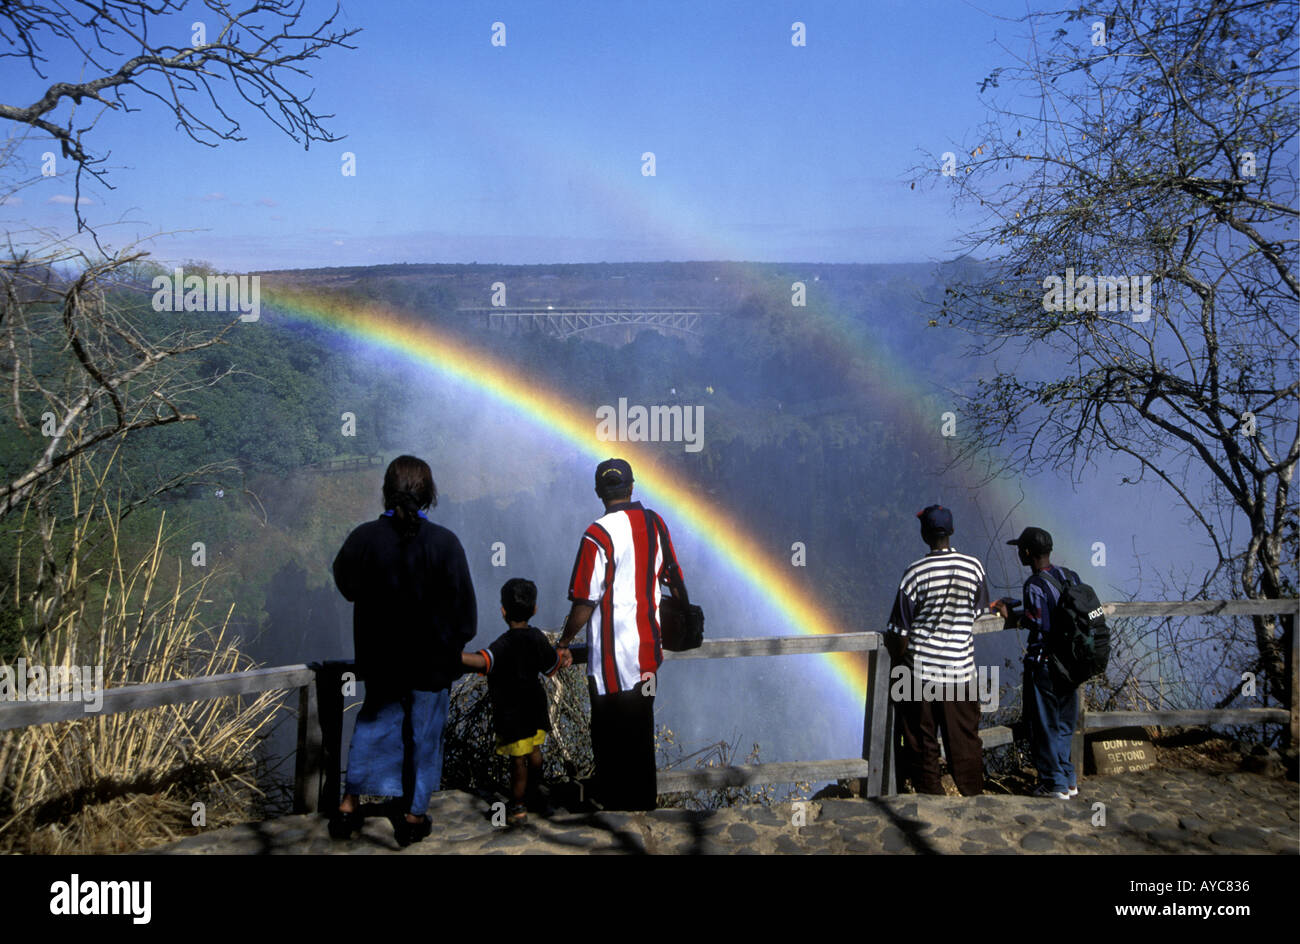 People enjoy looking at the double rainbow in the spray of Victoria Falls from the Zambia side Africa Stock Photo